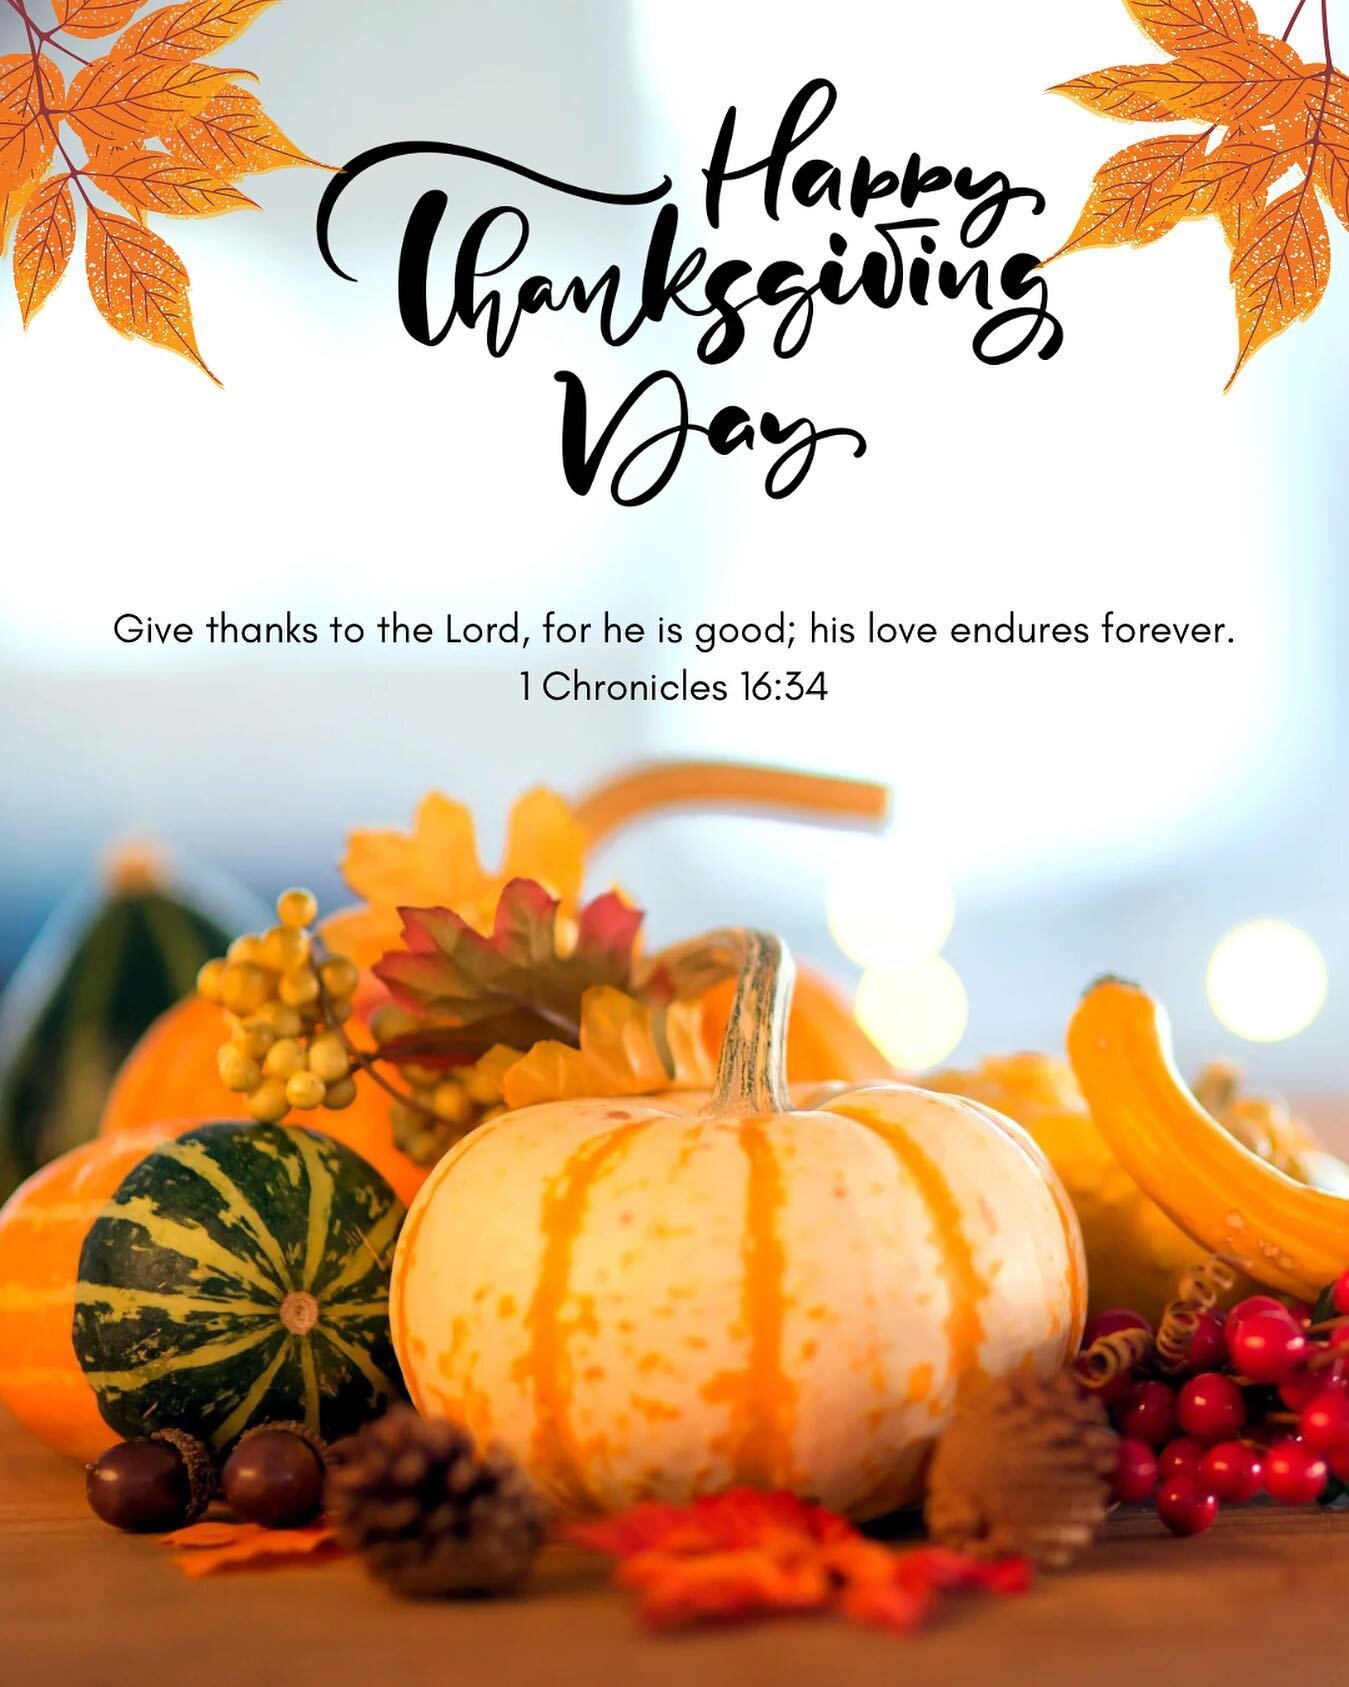 Happy Thanksgiving! We hope today is full of joy for you and your family. Let&rsquo;s bless the Lord and forget not all his benefits as we give thanks for everything we have and all he has done! 

#thanksgiving #thank #thankgod